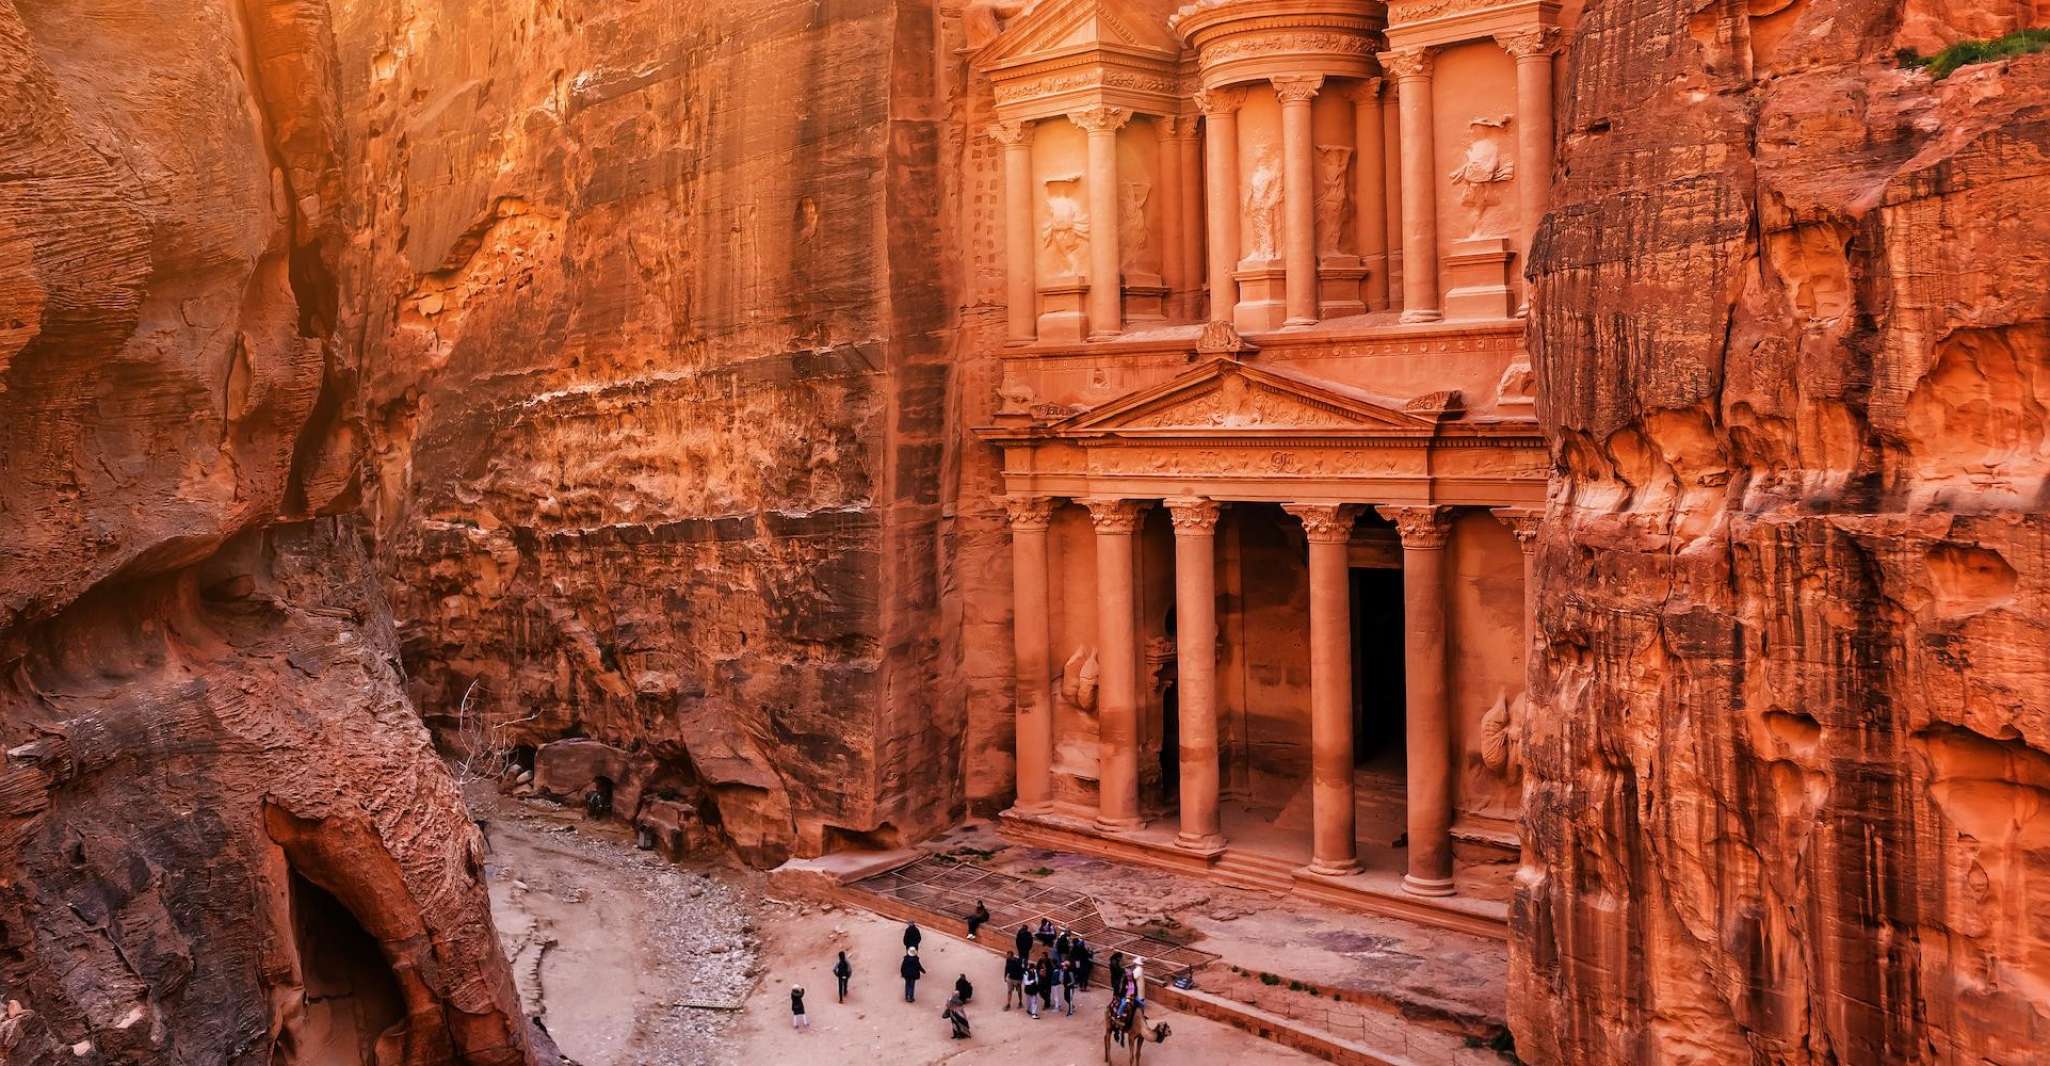 From Petra, Petra Day Tour - Housity